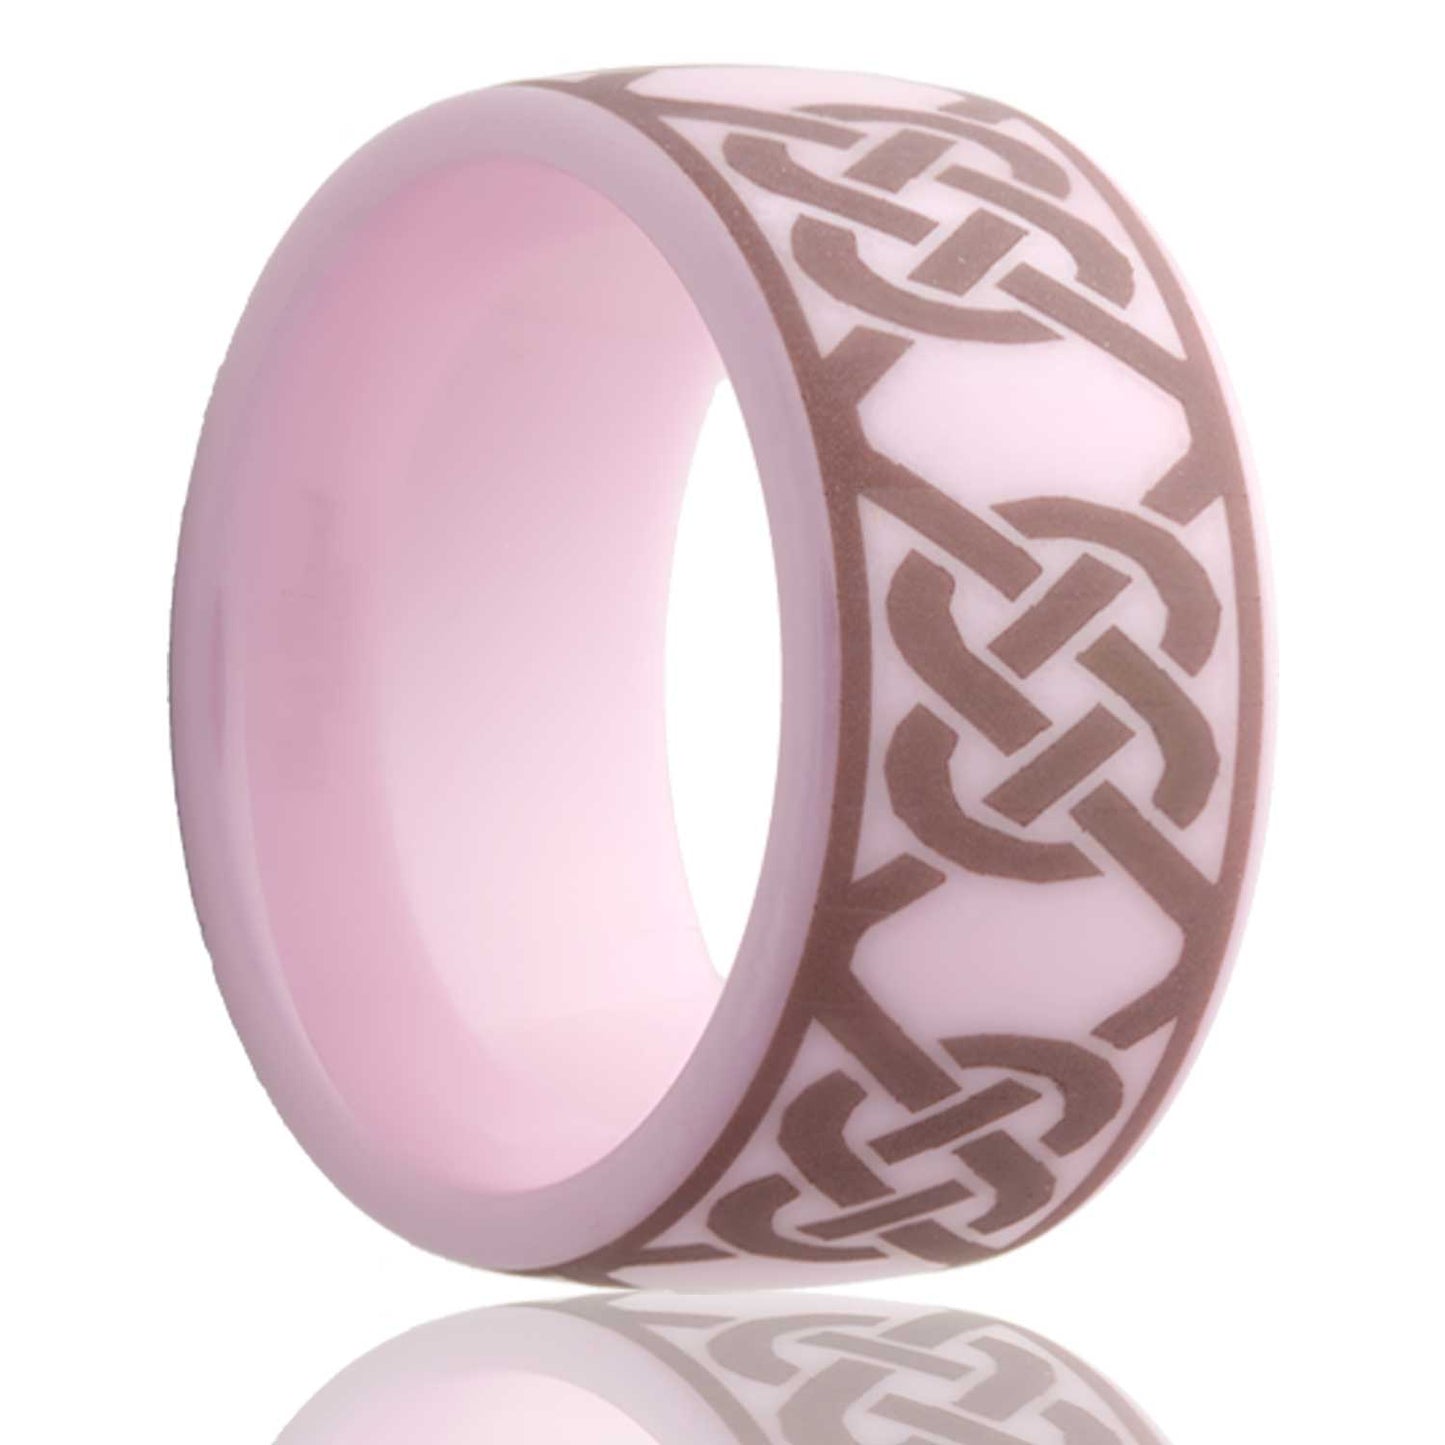 A celtic twist knot domed pink ceramic men's wedding band displayed on a neutral white background.